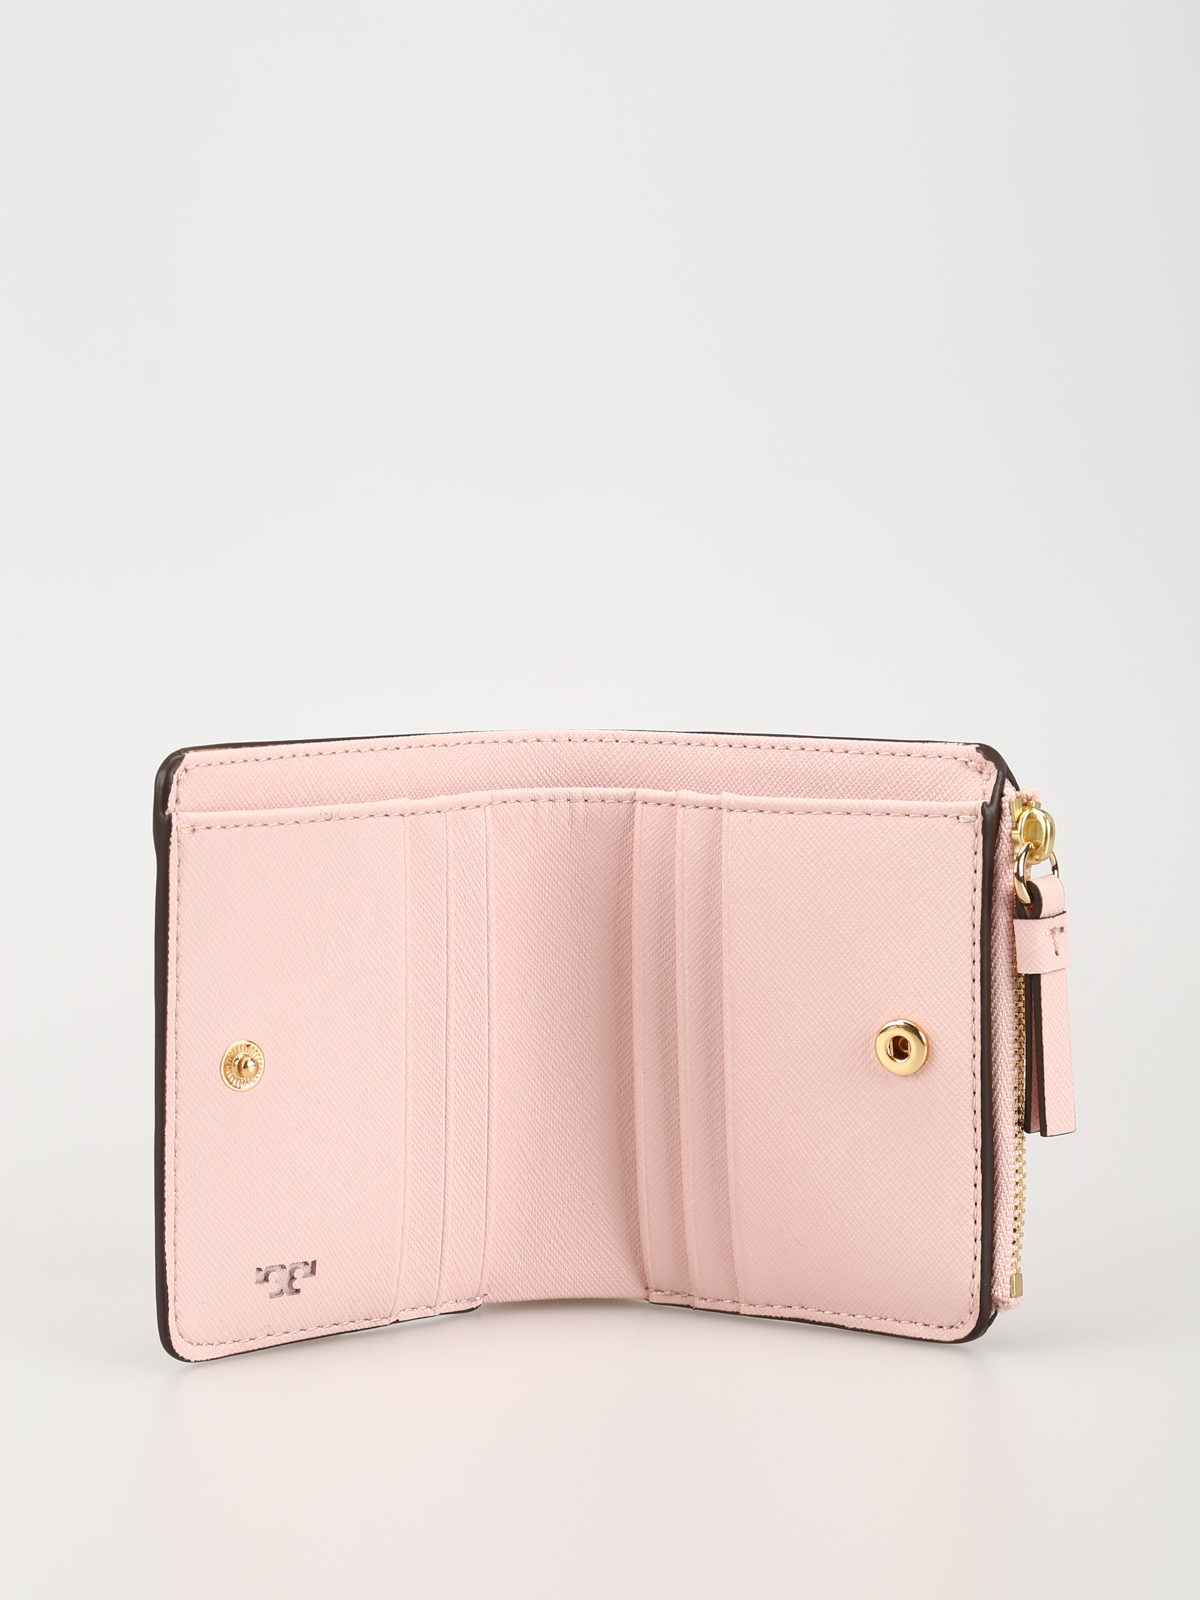 TORY BURCH PINK ROBINSON WALLET WITH STRAP – Baltini